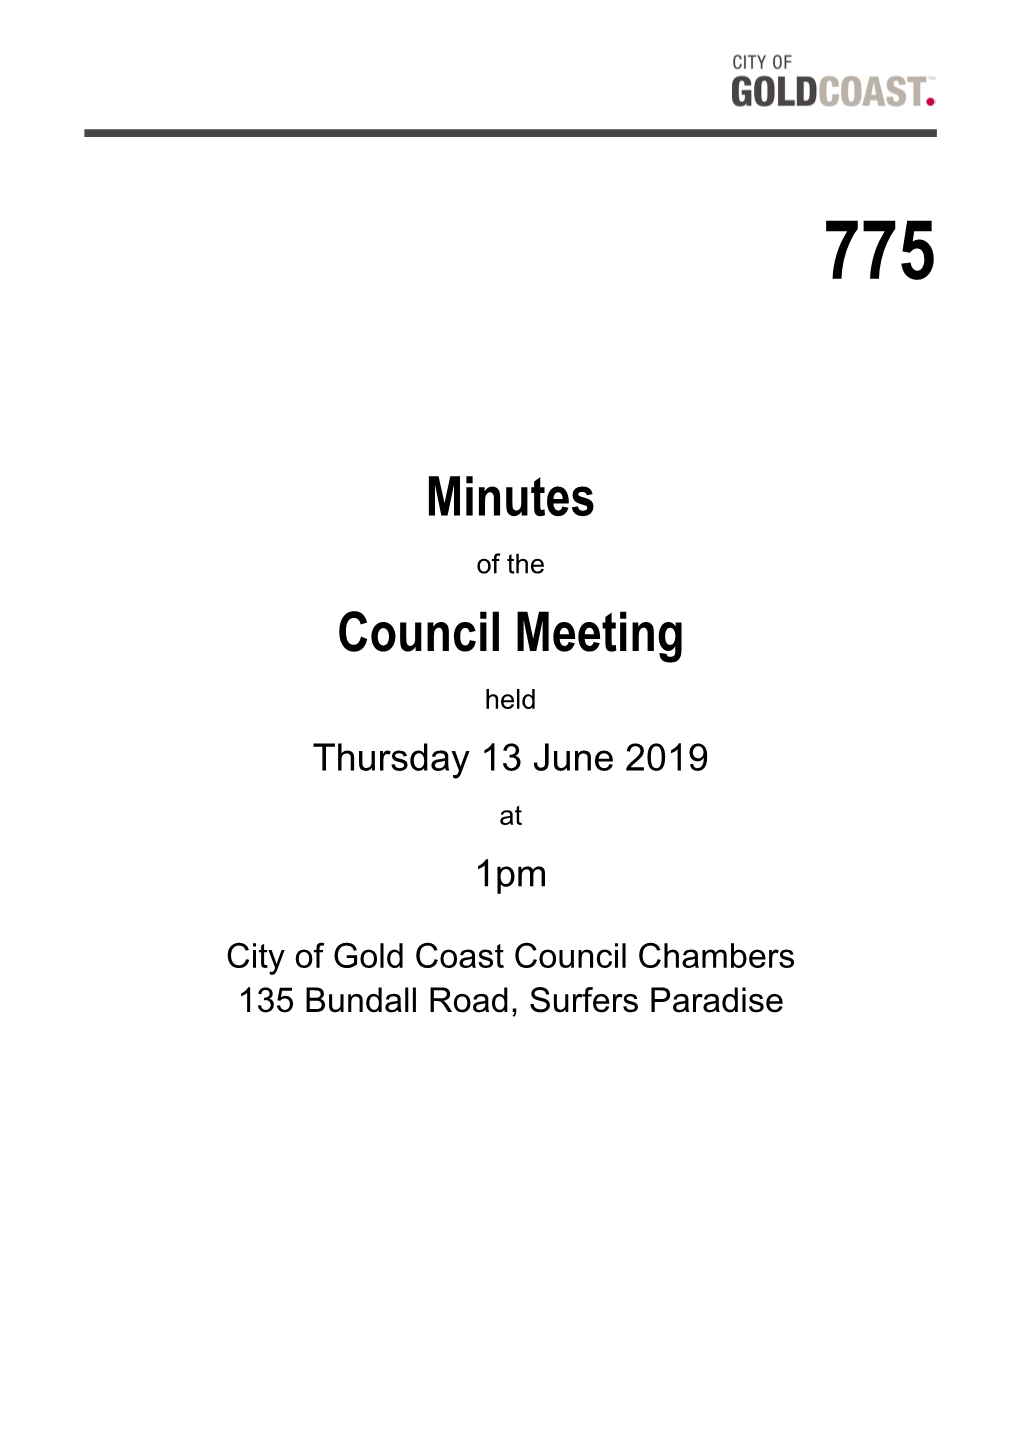 Minutes Council Meeting